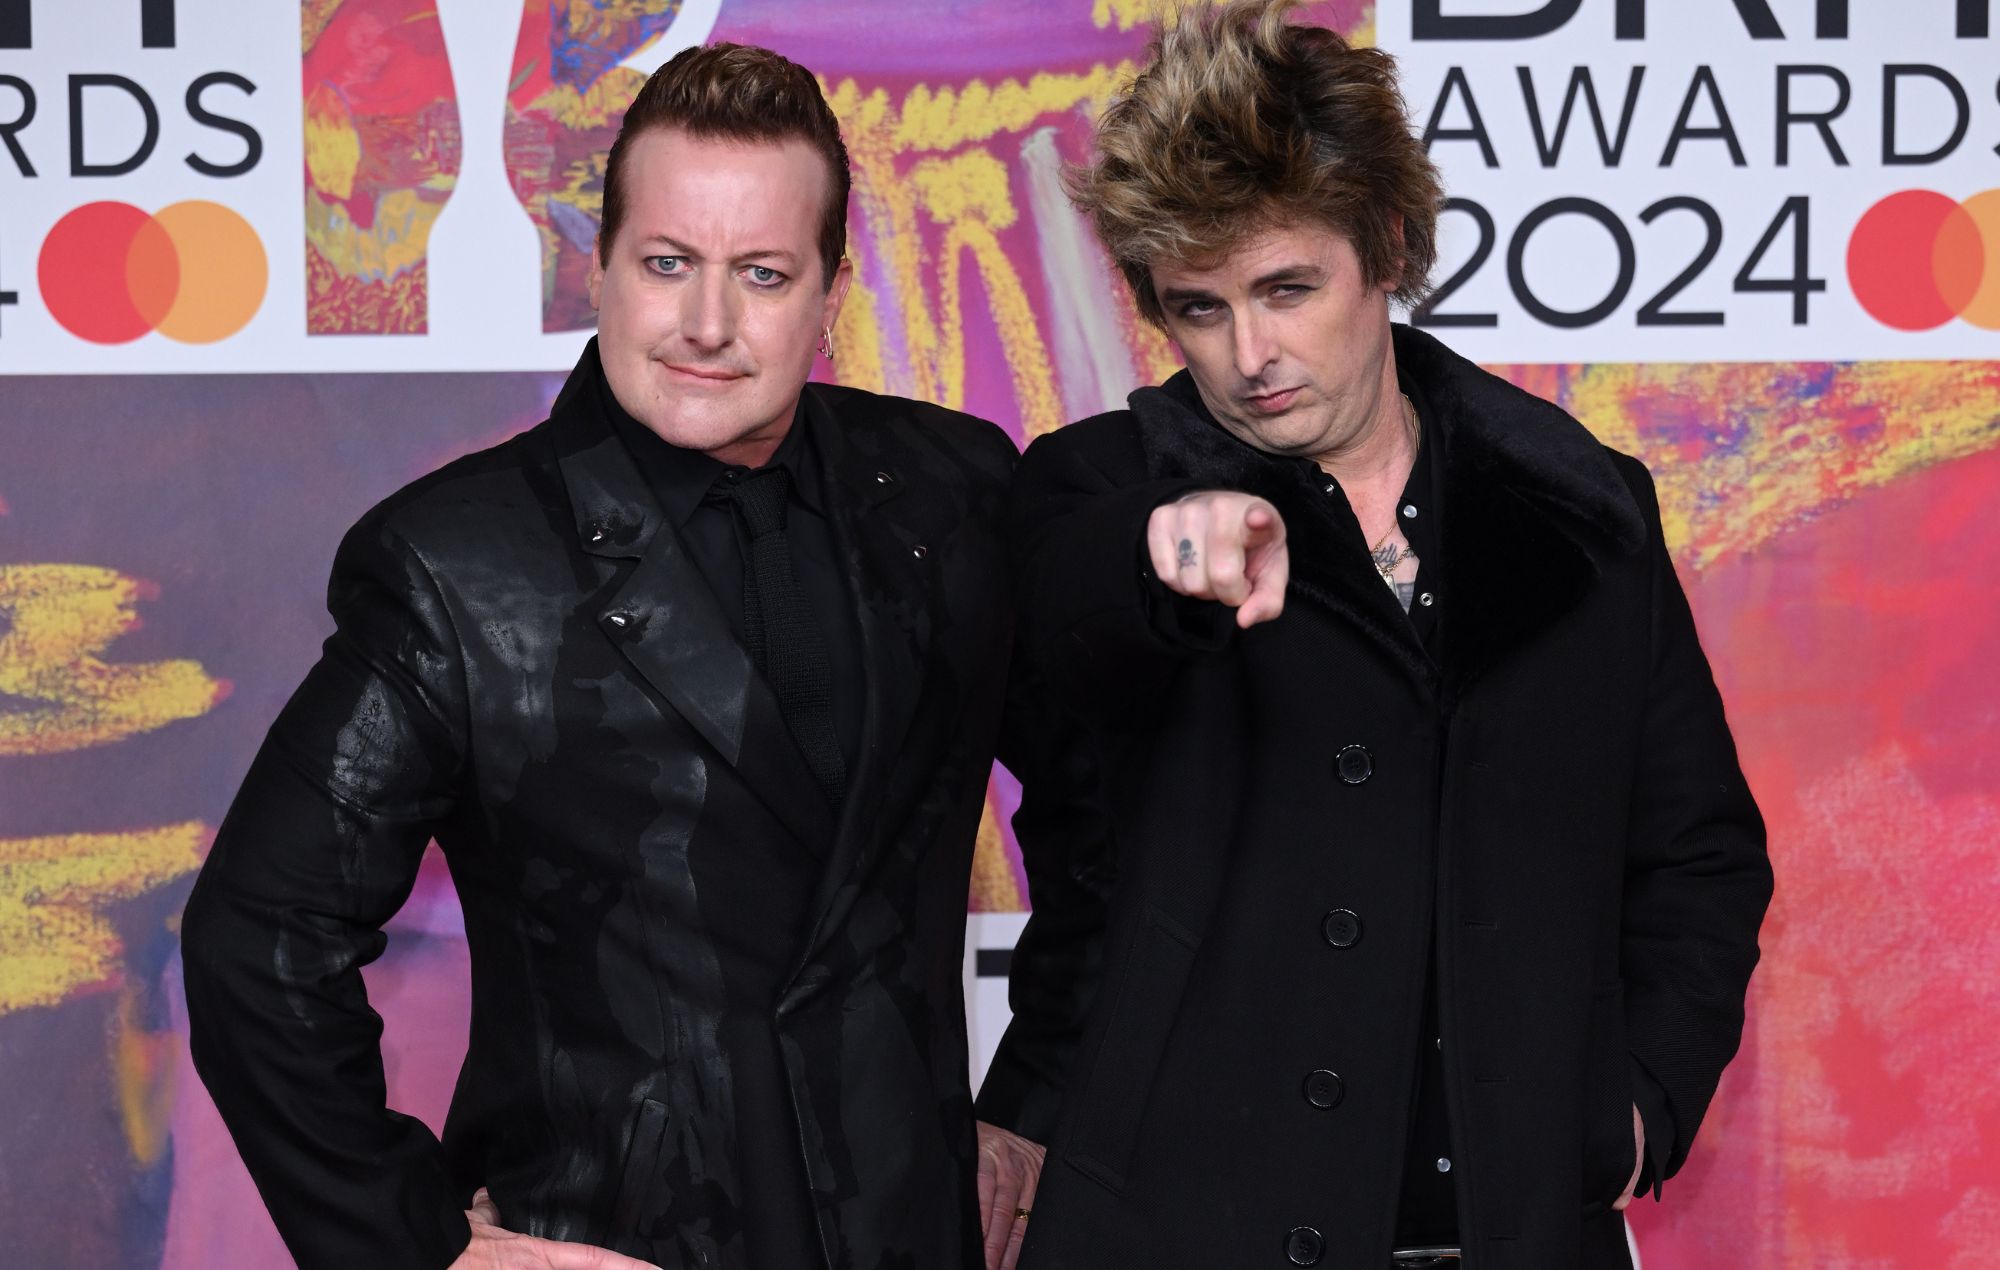 Tré Cool and Billie Joe Armstrong of Green Day attend the BRIT Awards 2024 at The O2 Arena on March 02, 2024 in London, England.